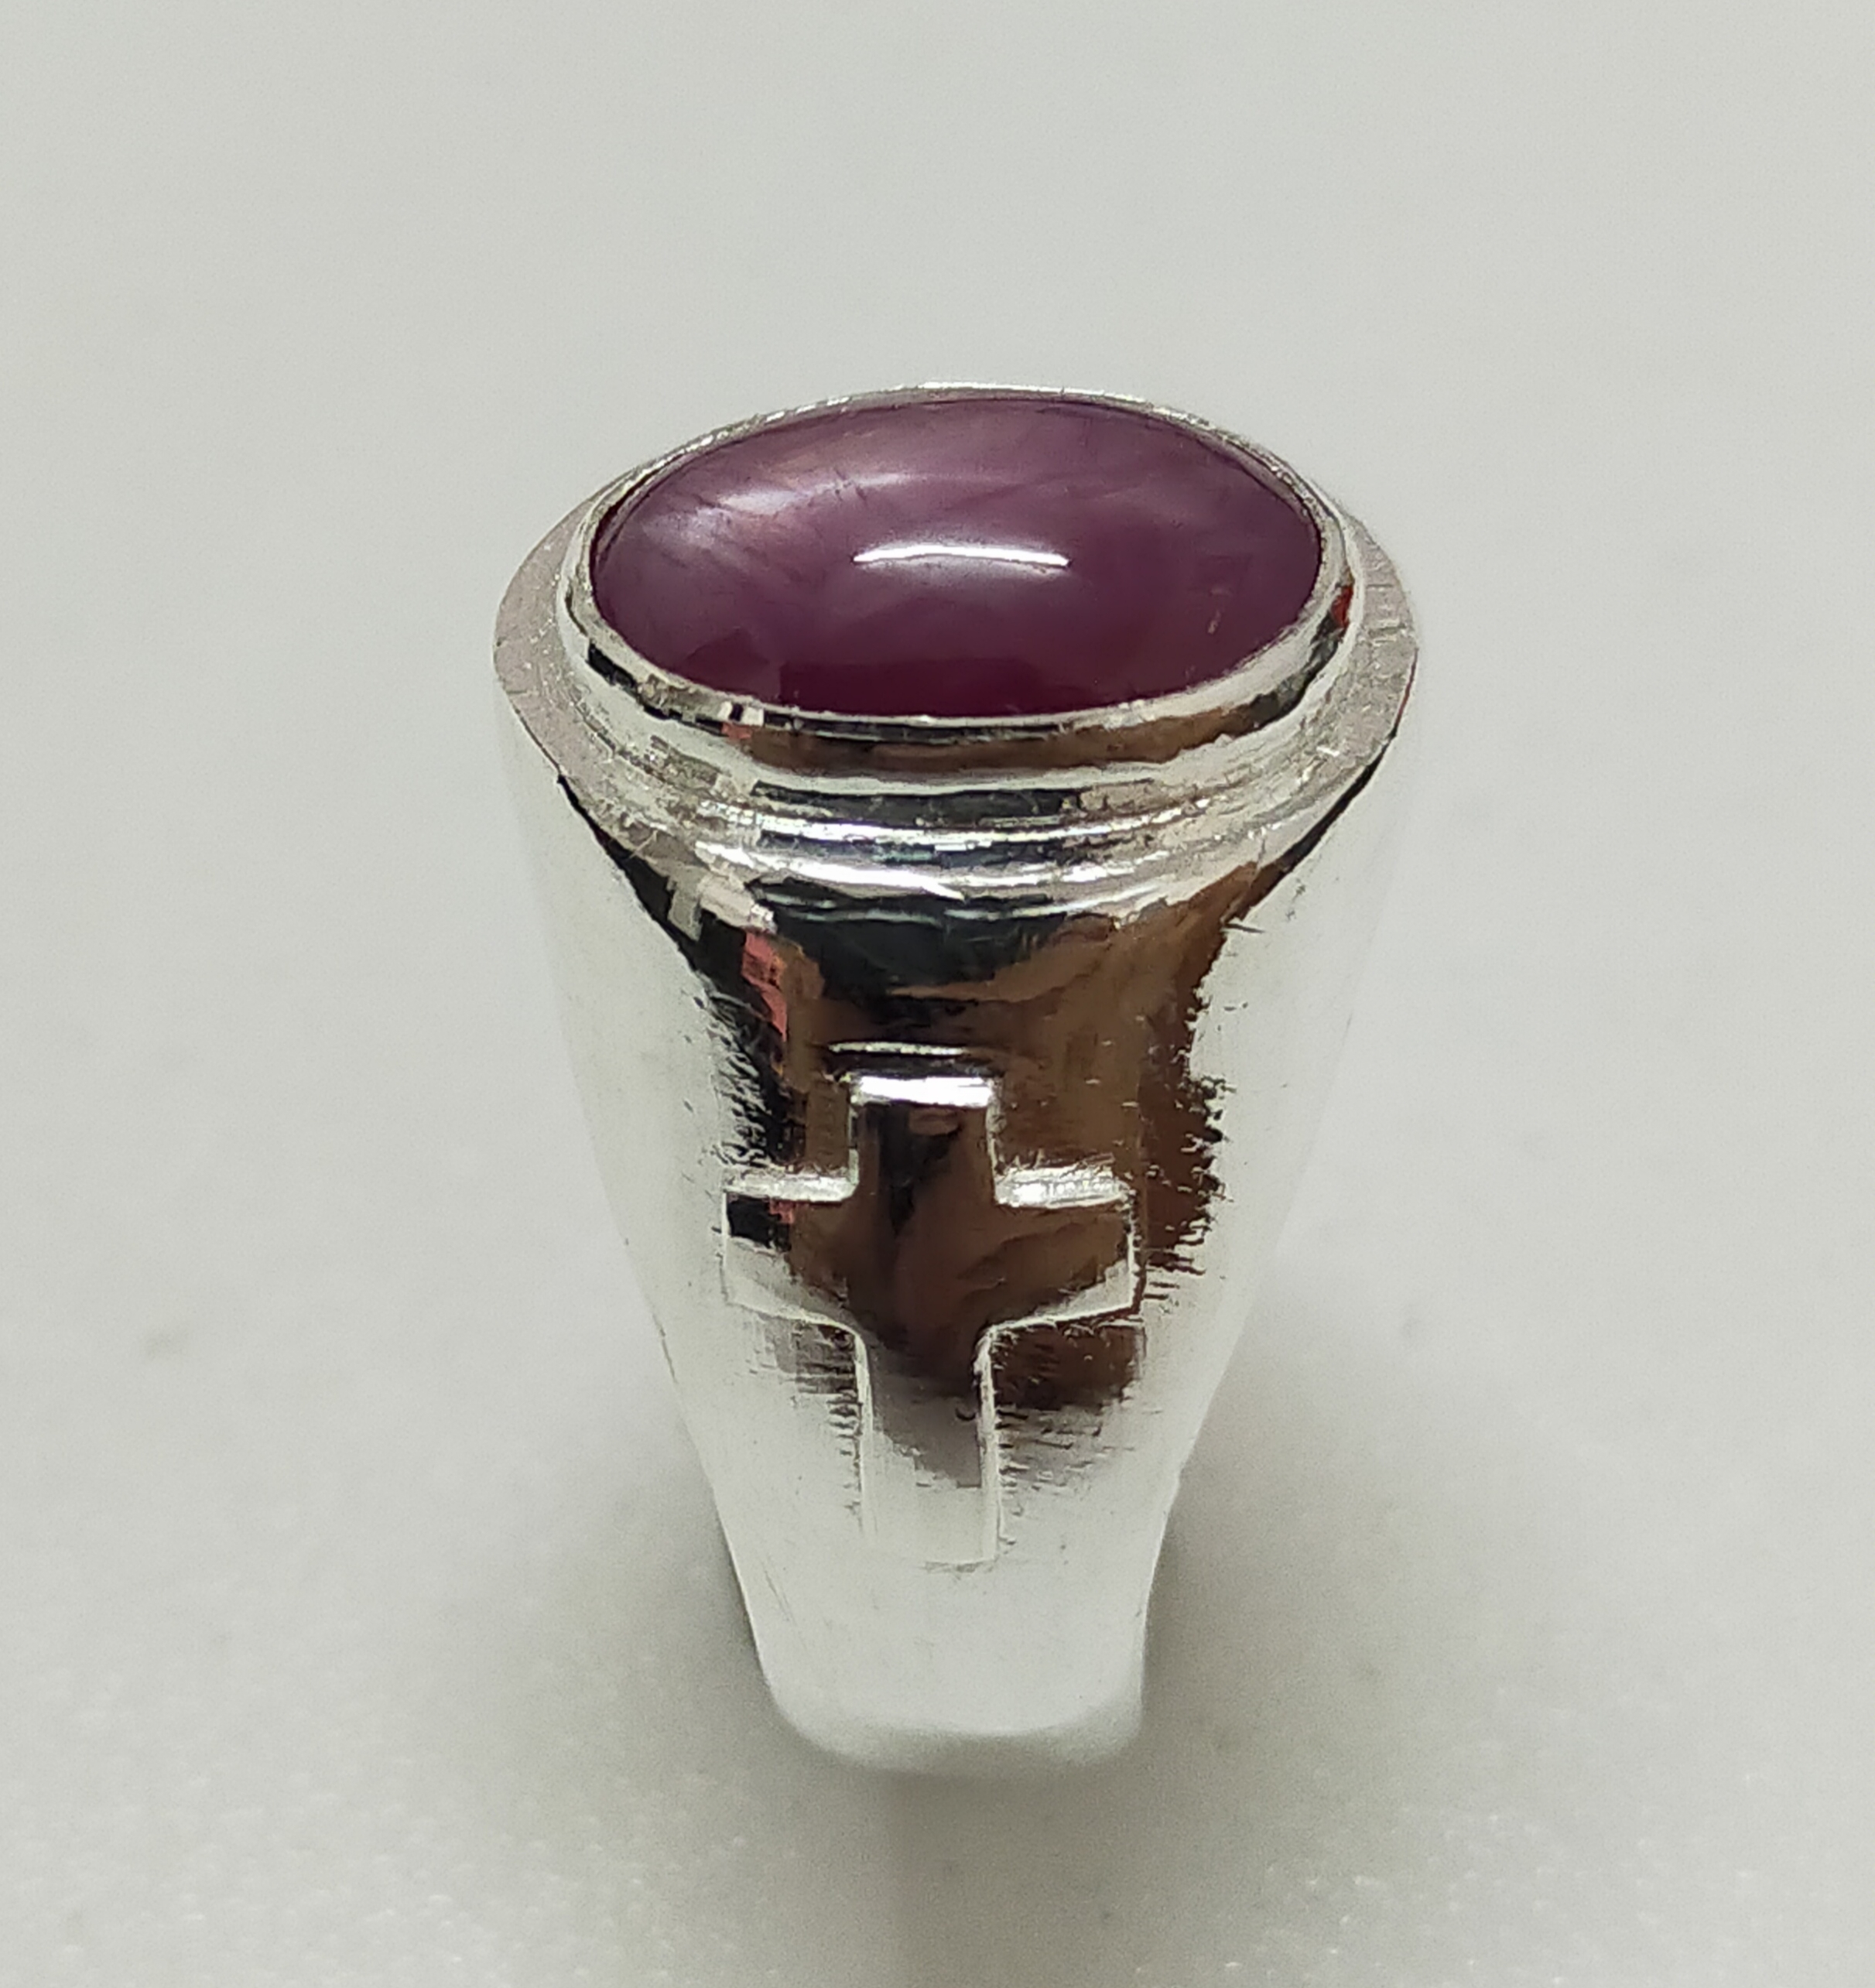 Respectfully 6.7Ct Vietnam Star Ruby Set in Solid Silver Bishop Ring